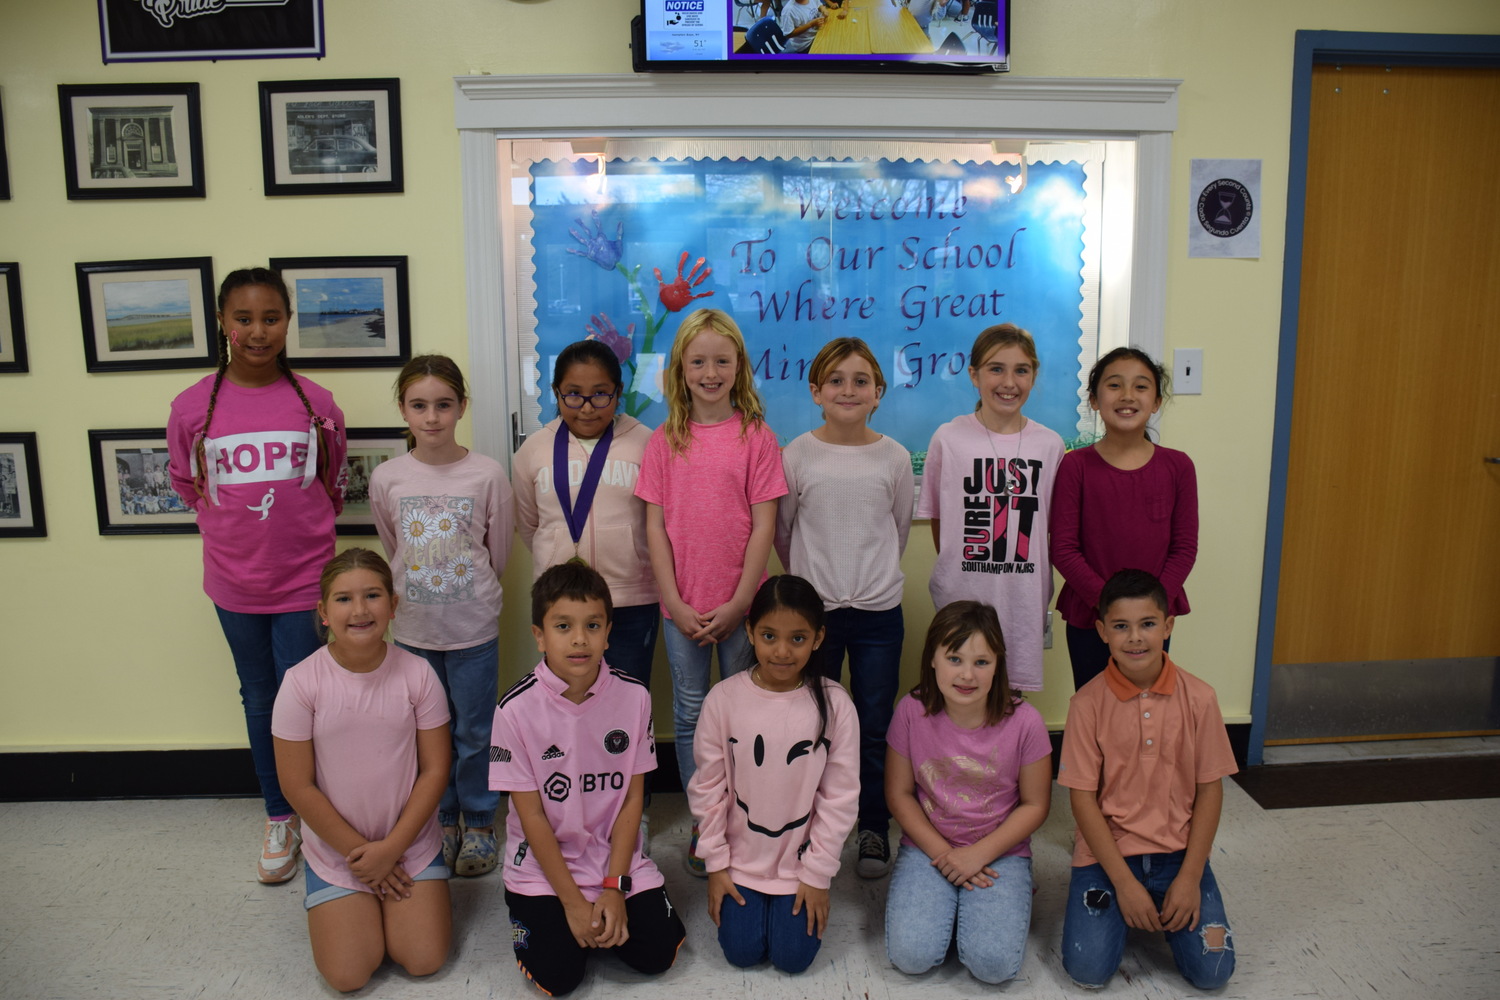 Members of the Hampton Bays Elementary School K-Kids recently donated $250 to the American Cancer Society as part of its annual breast cancer awareness fundraiser. They raised the funds by selling breast cancer awareness bracelets and pins to fellow students, teachers and administrators. Students and staff also wore the color pink on October 27to highlight the cause. COURTESY HAMPTON BAYS SCHOOL DISTRICT